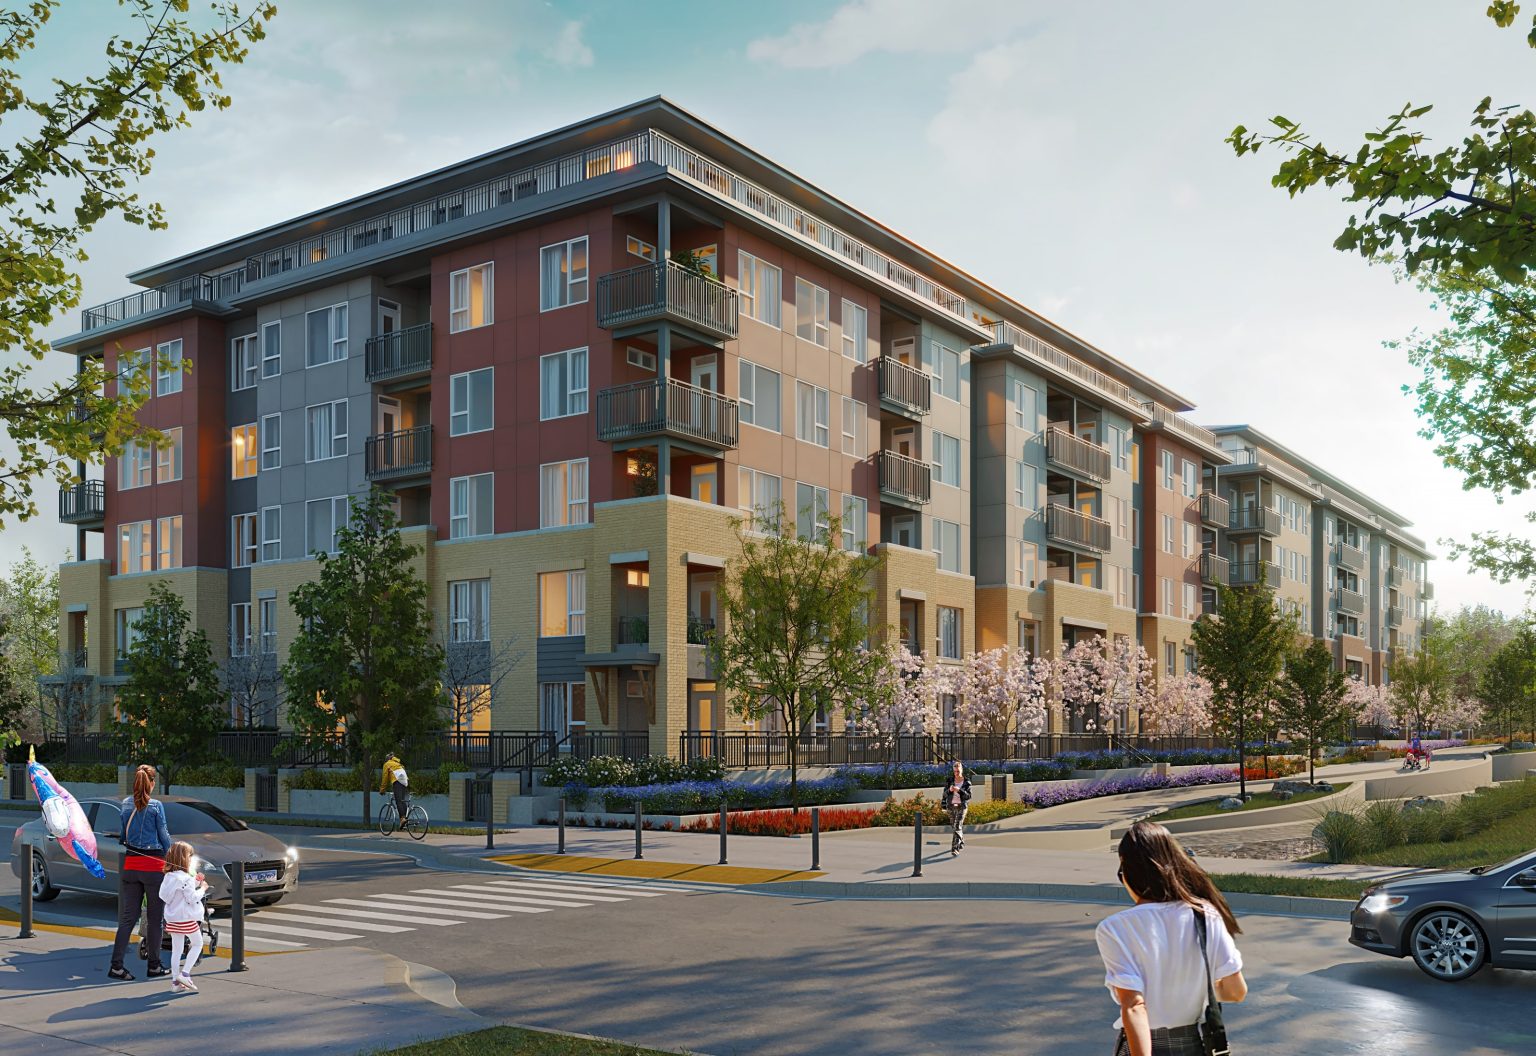 A collection of 140 North Shore condominiums in two 6-storey buildings.